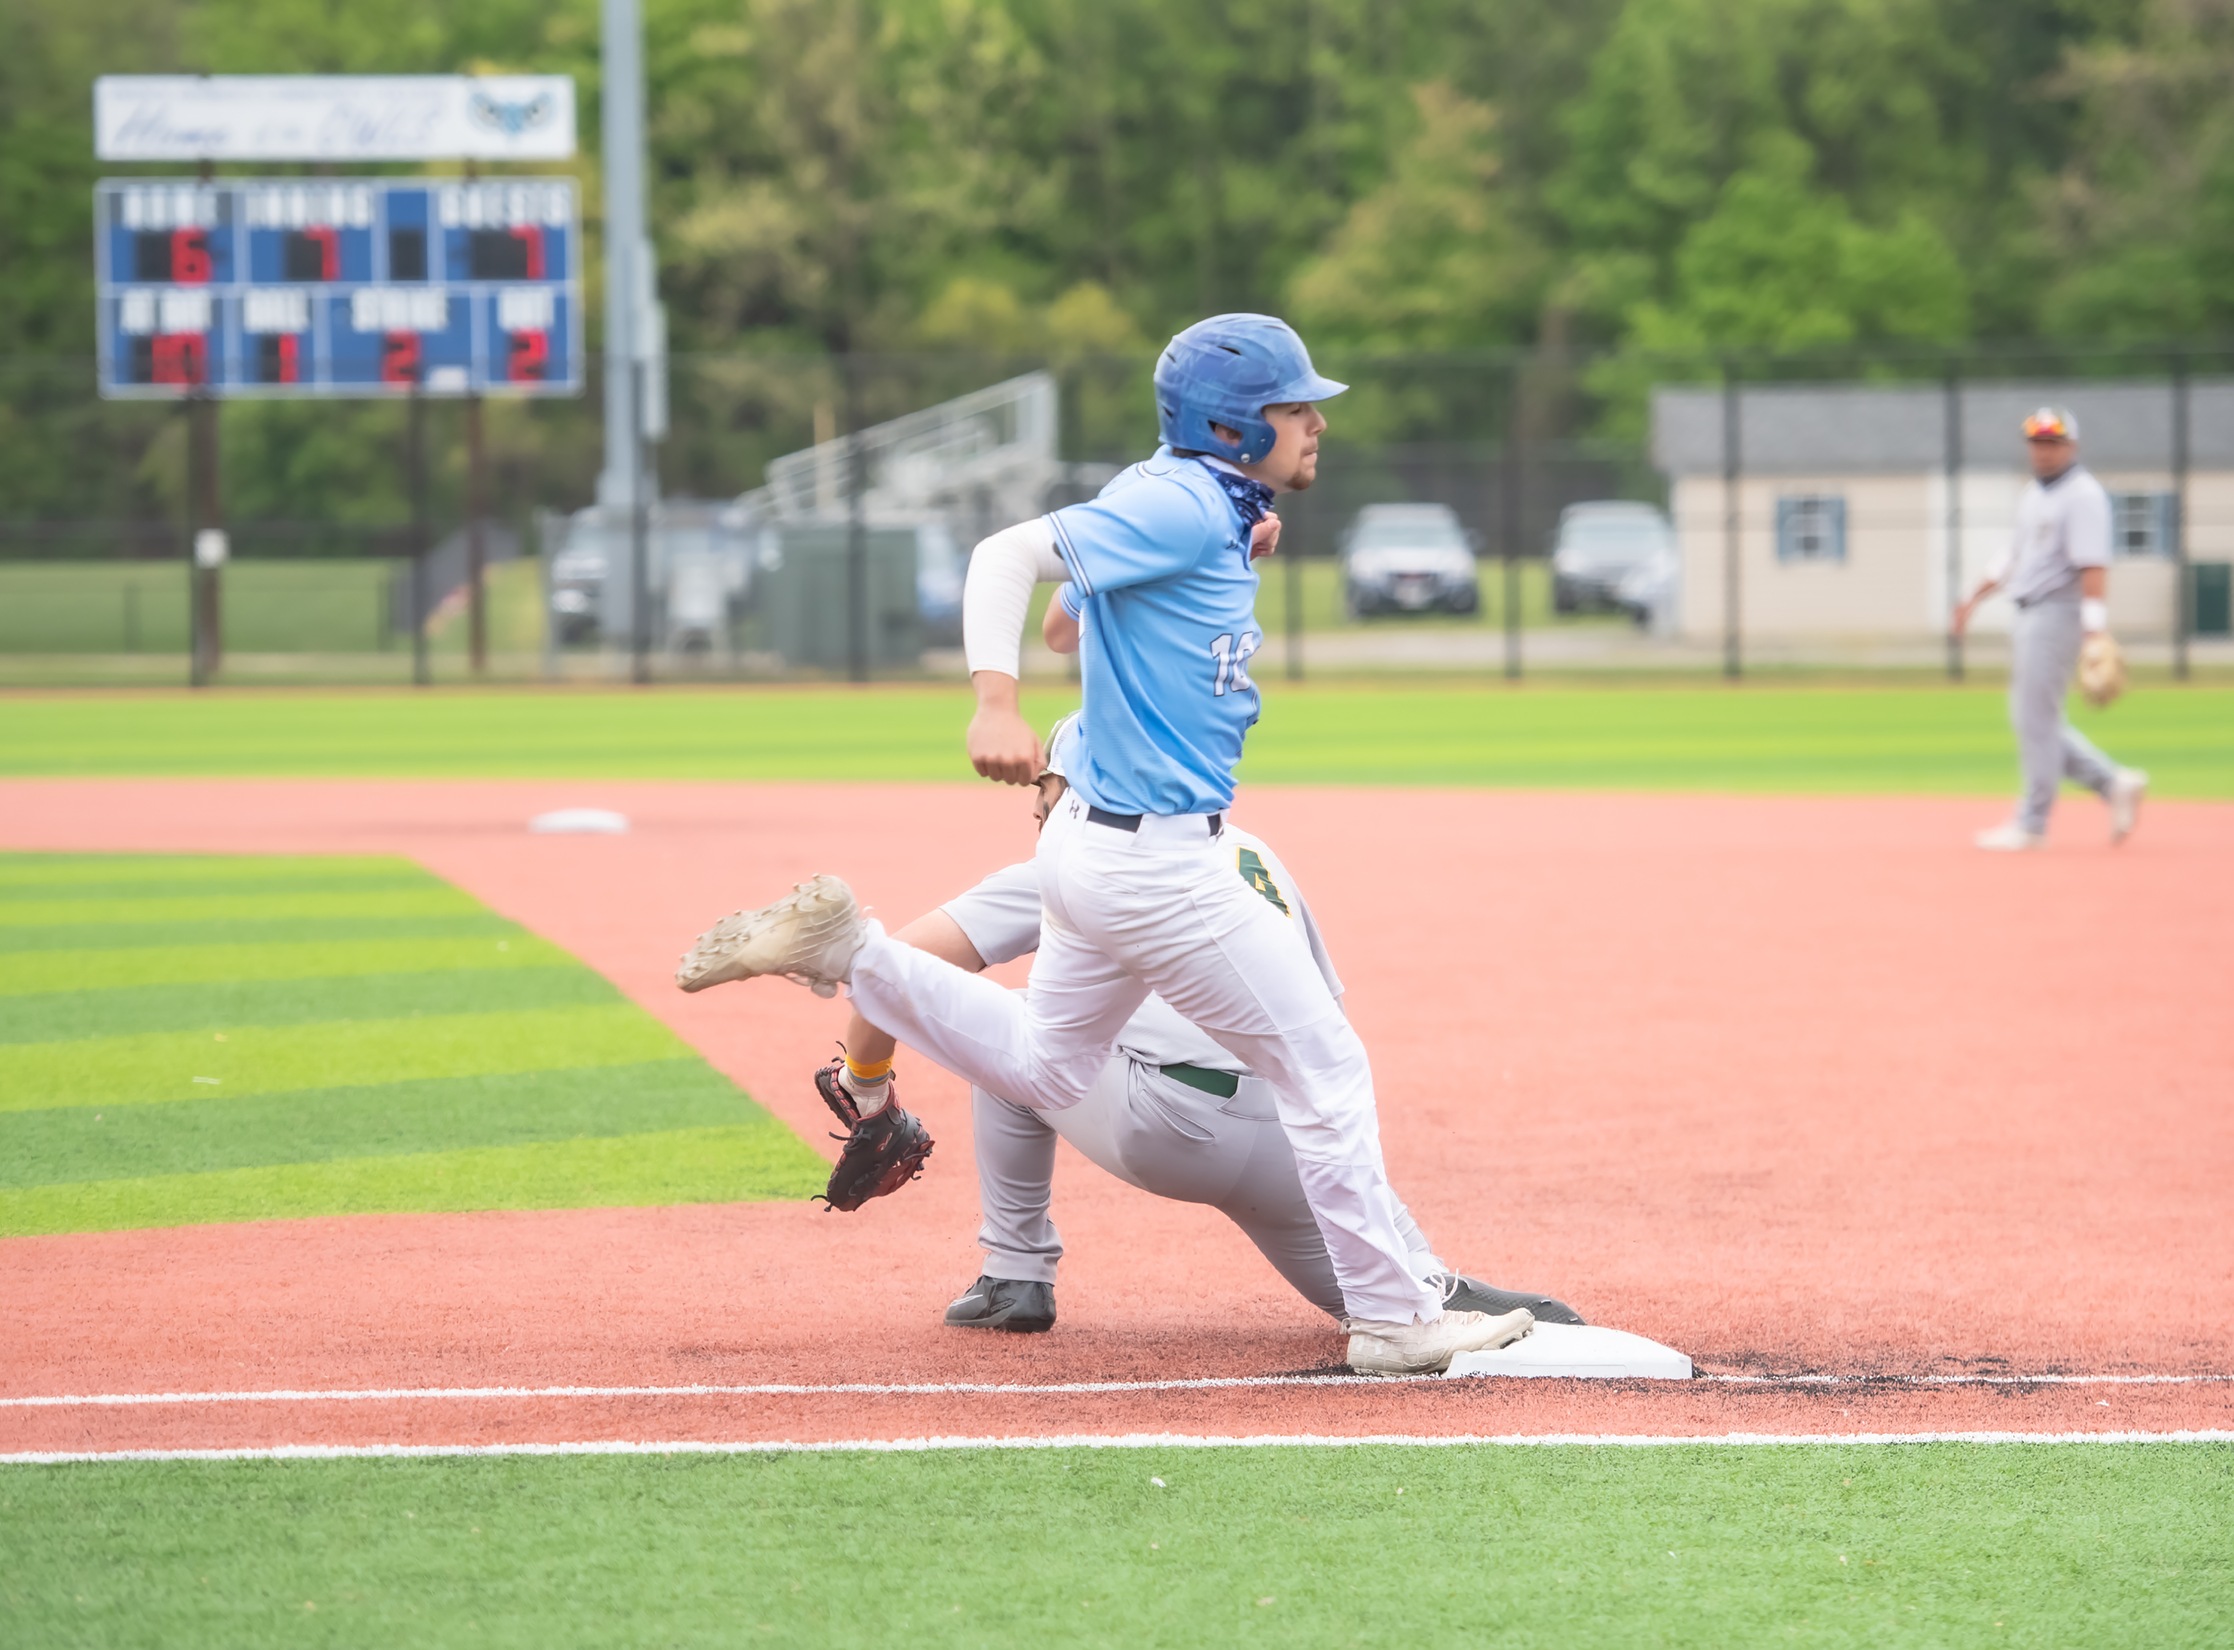 Grayson Lewis (10) beats the throw at first in the bottom of the seventh-inning on Saturday, April 24th against the Frederick Cougars. Lewis would go on to score the winning run on Saturday afternoon as the Owls topped the Cougars, 8-7.